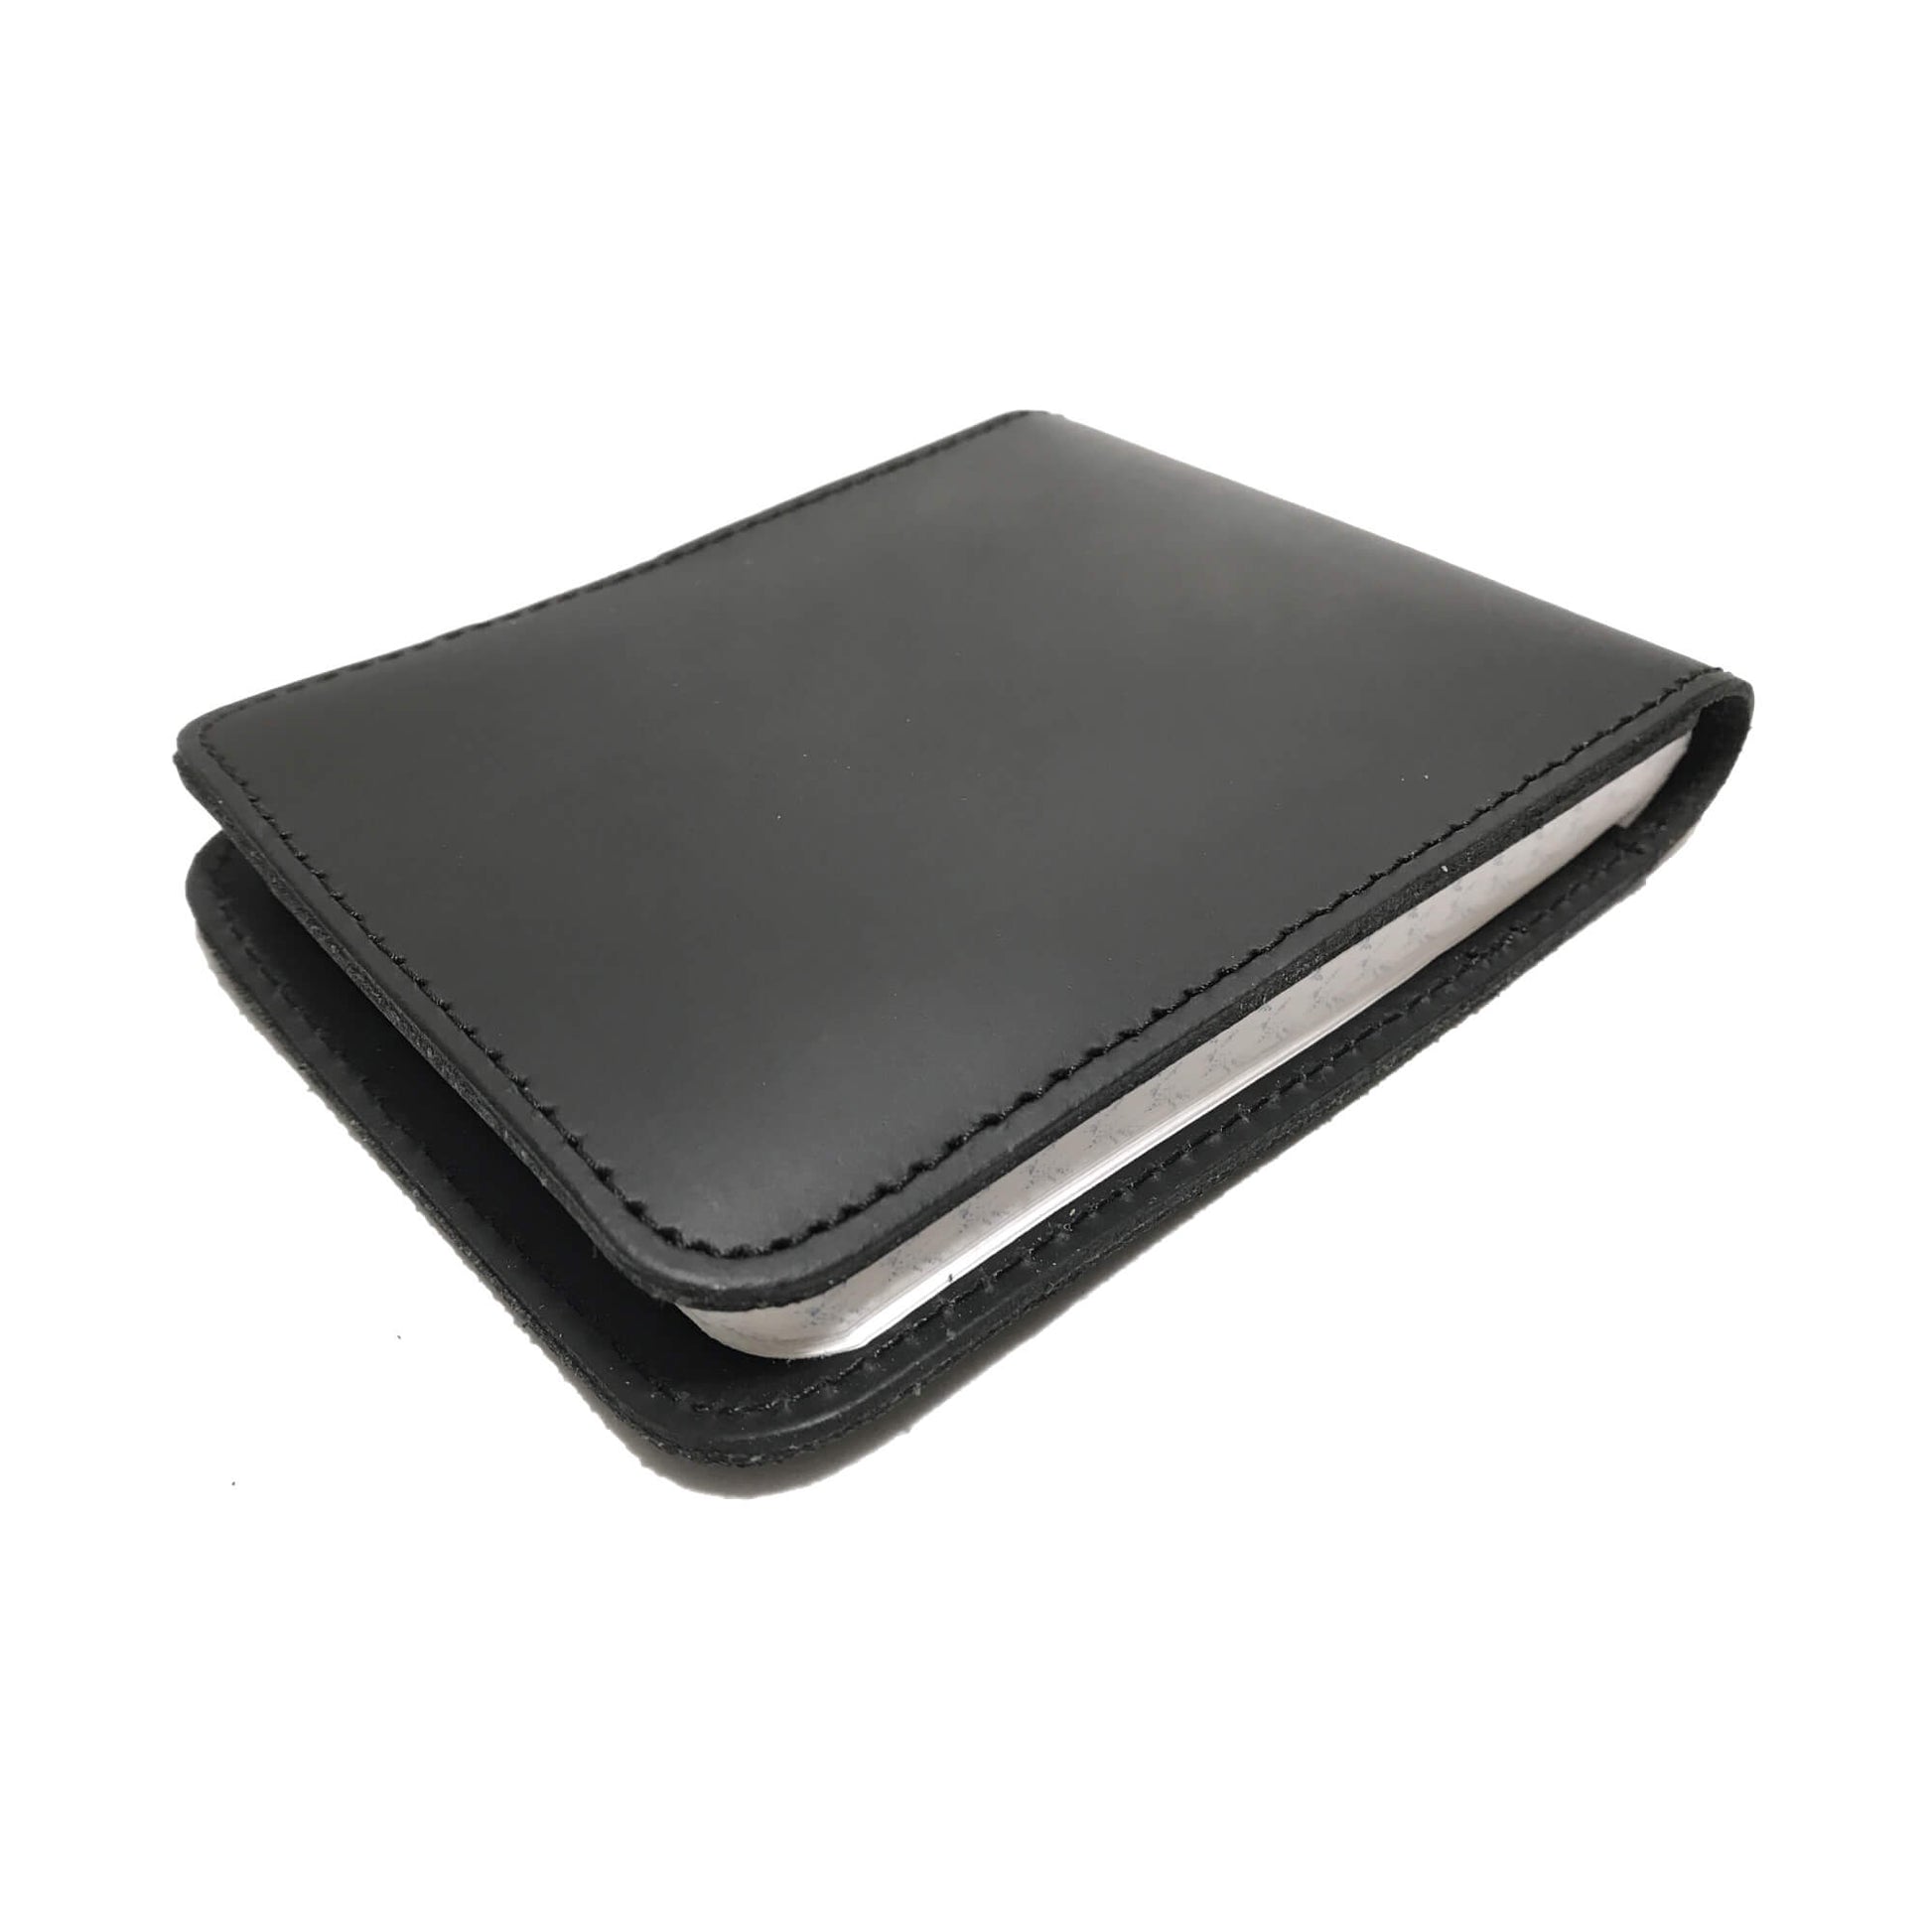 CBSA Notebook Cover-Perfect Fit-911 Duty Gear Canada